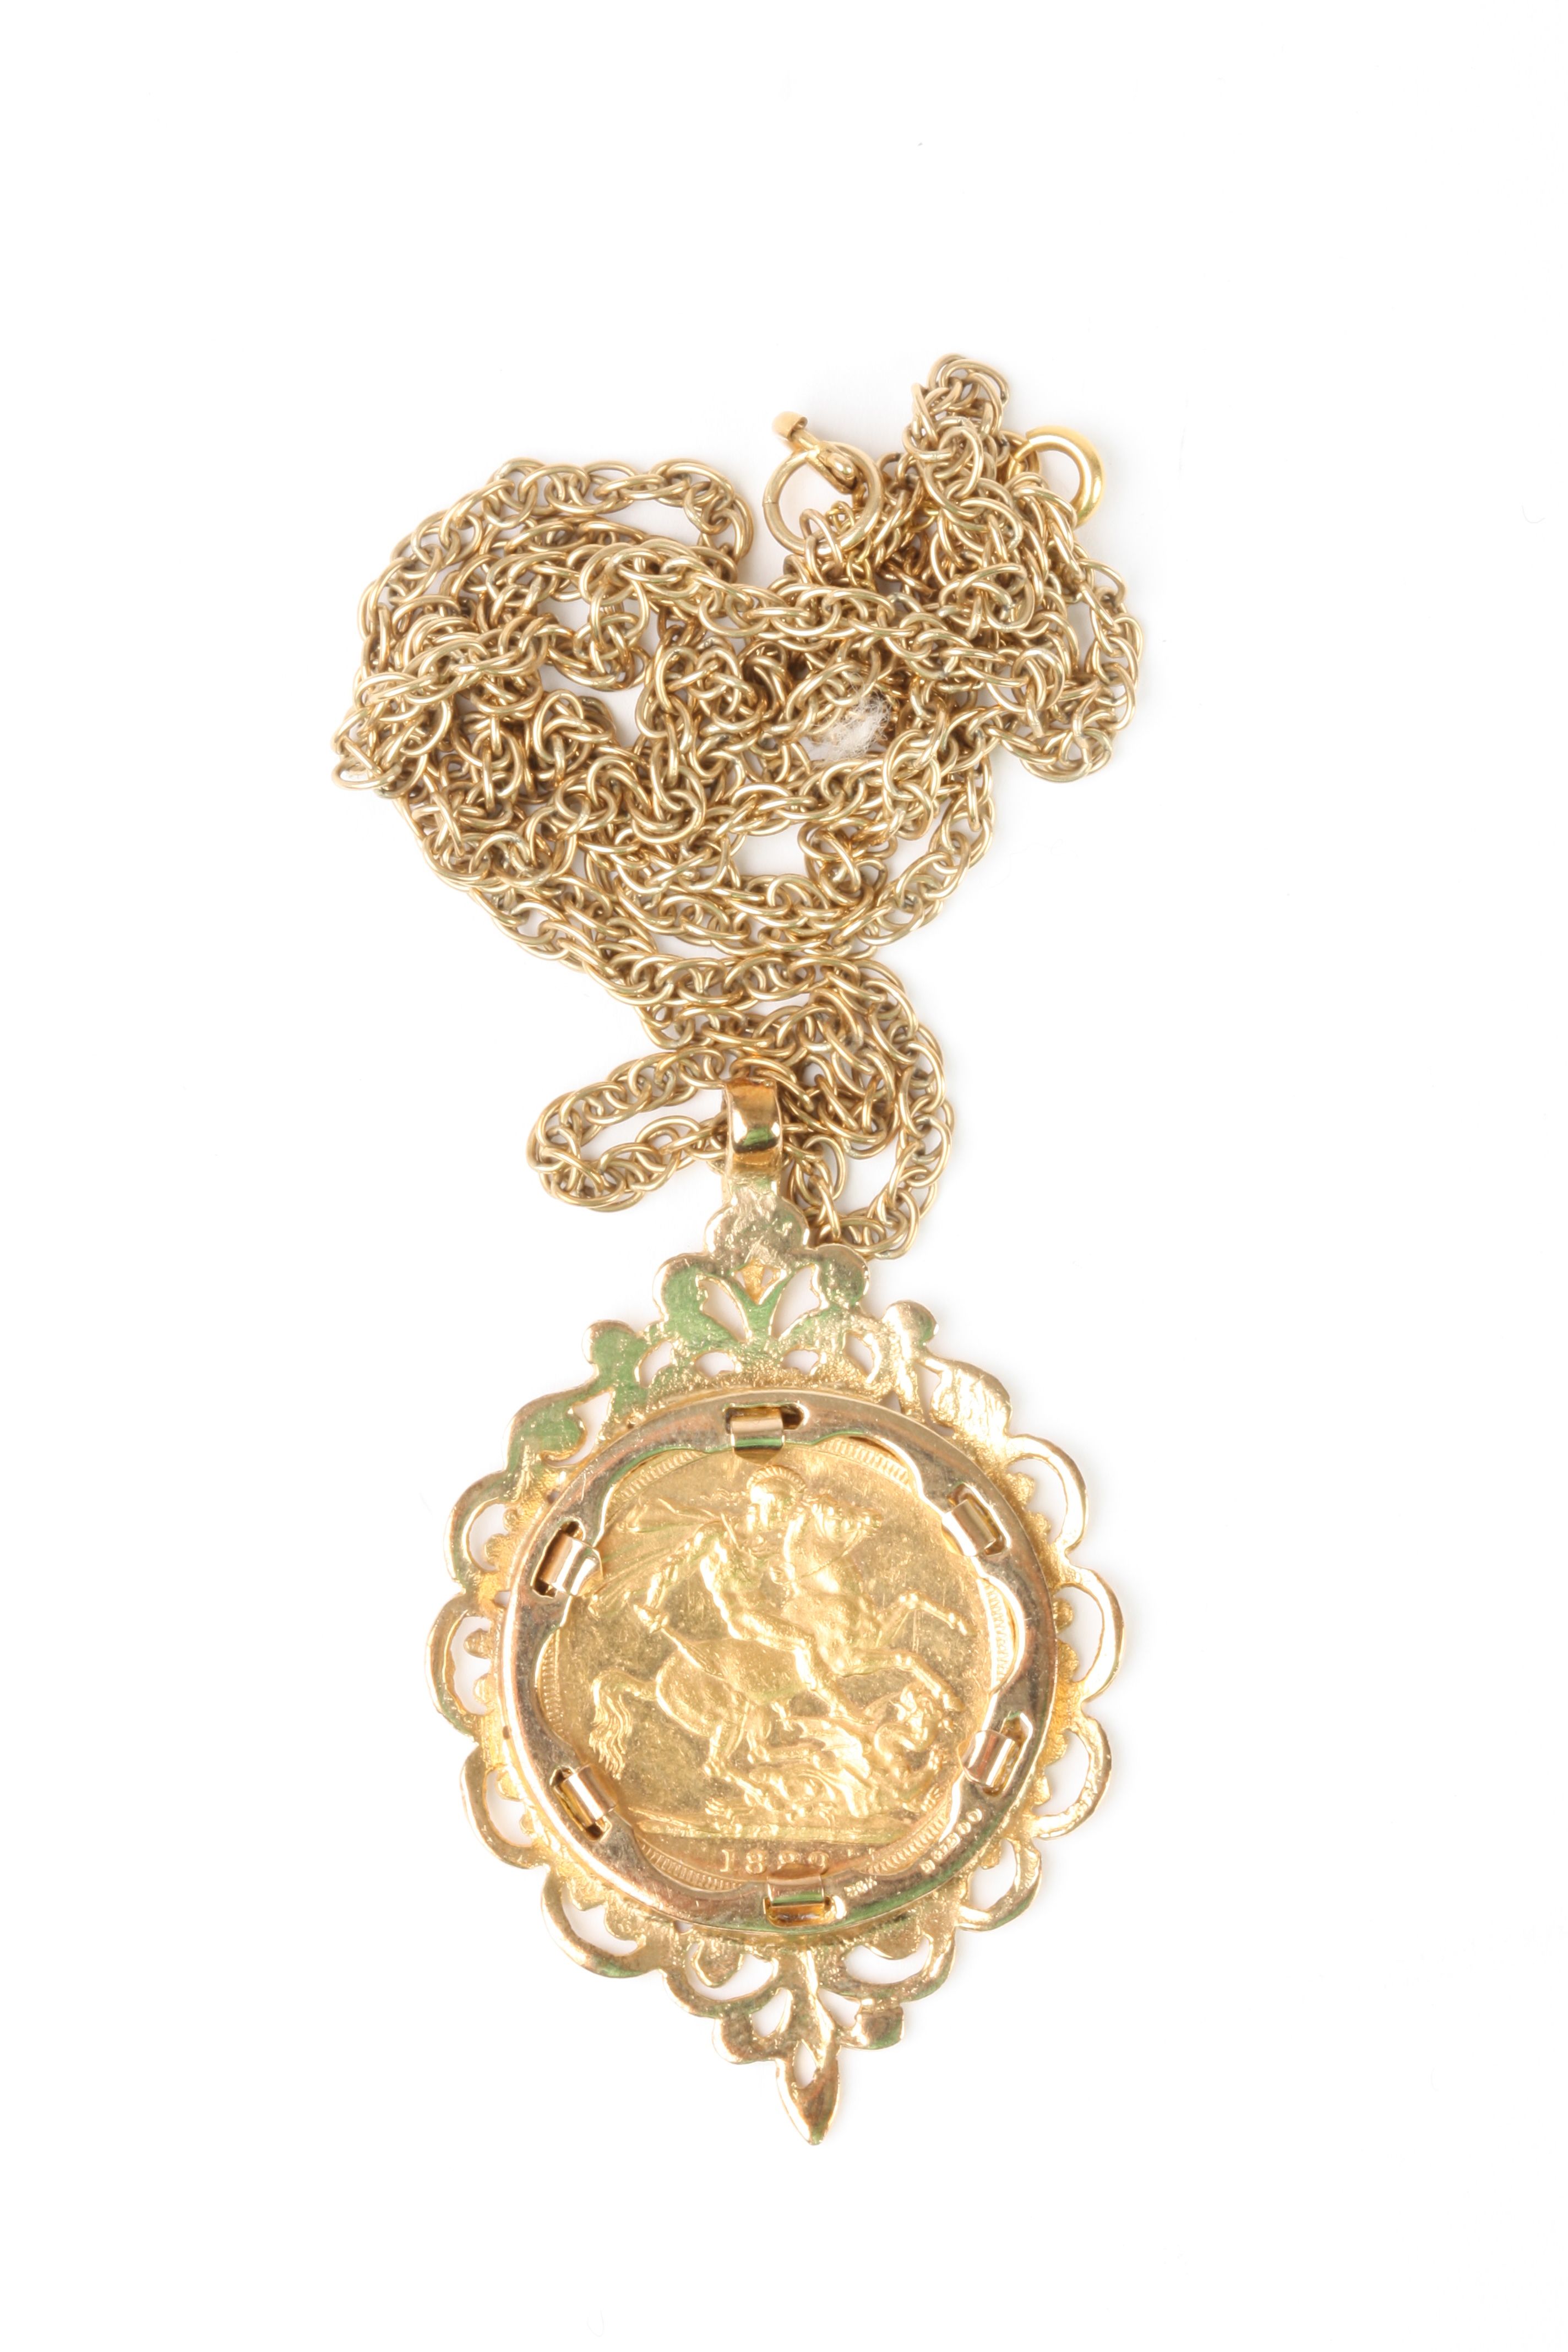 A Victorian 1889 22ct gold full sovereign
in an ornate foliate 9ct gold mount, on a 9ct gold chain.